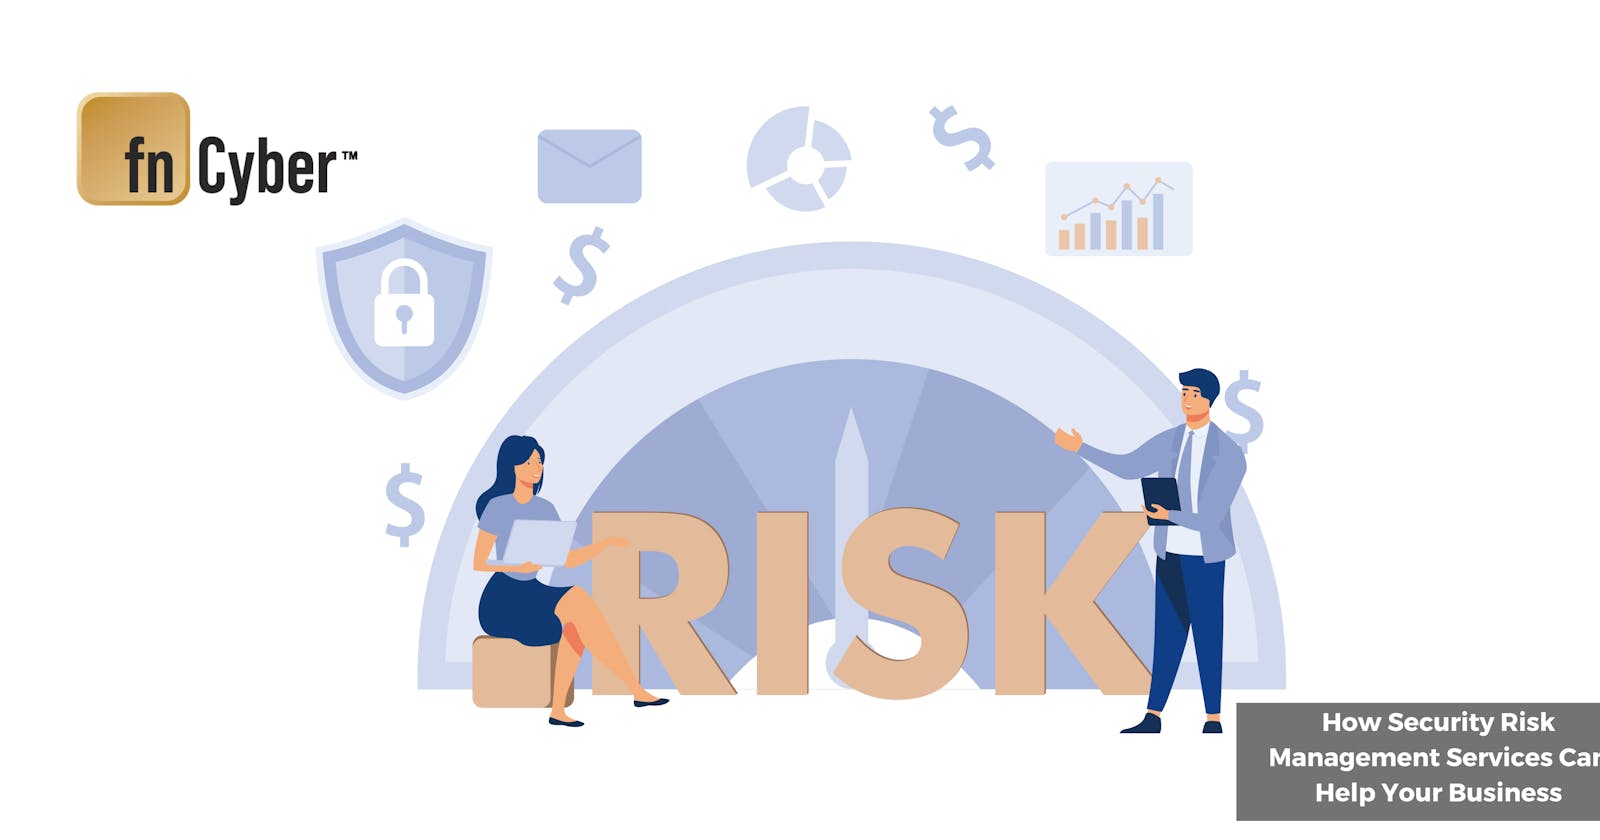 How Security Risk Management Services Can Help Your Business